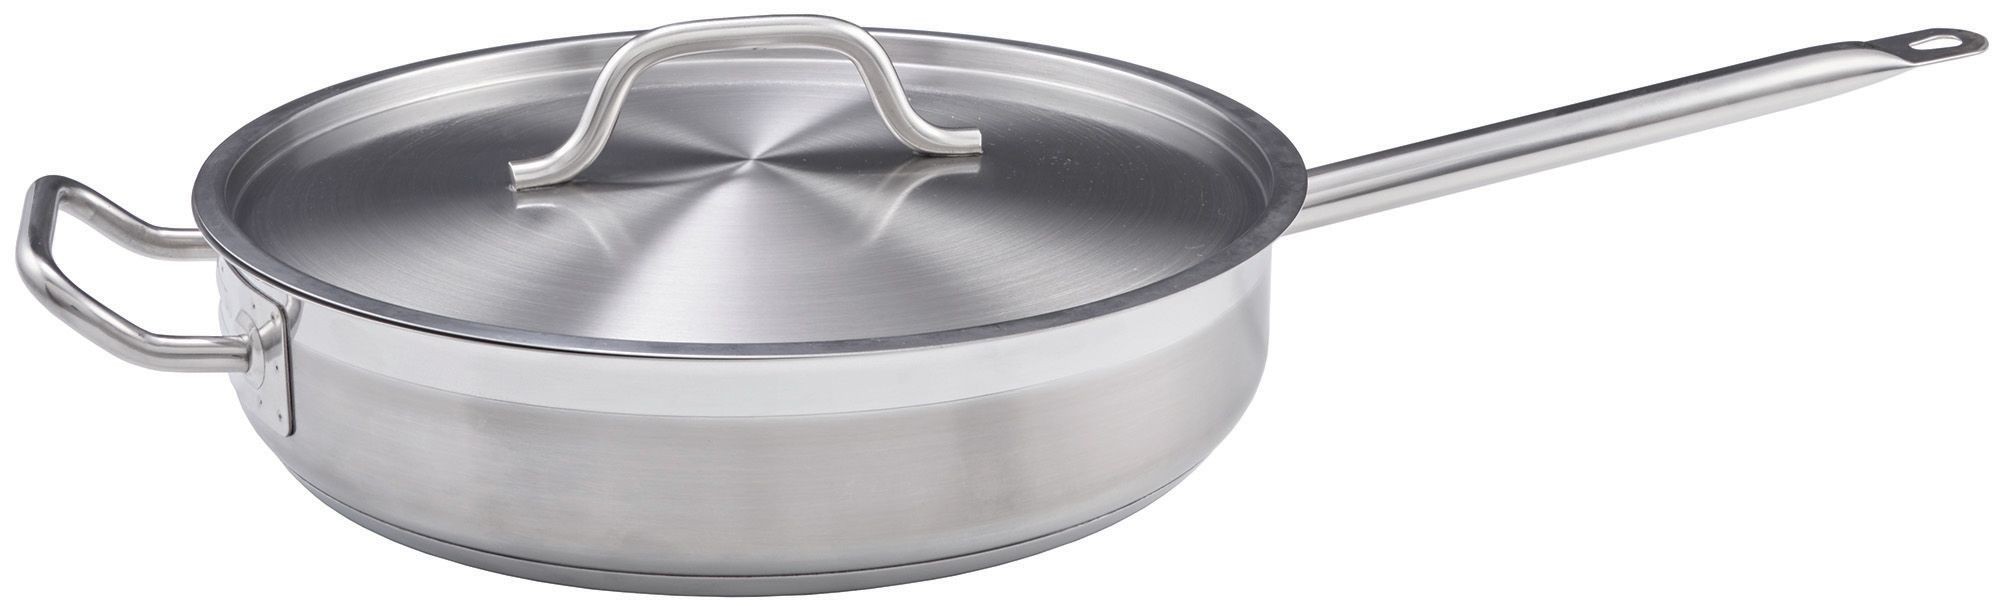 Winco SSET-3 Stainless Steel 3 Qt. Saute´ Pan with Cover